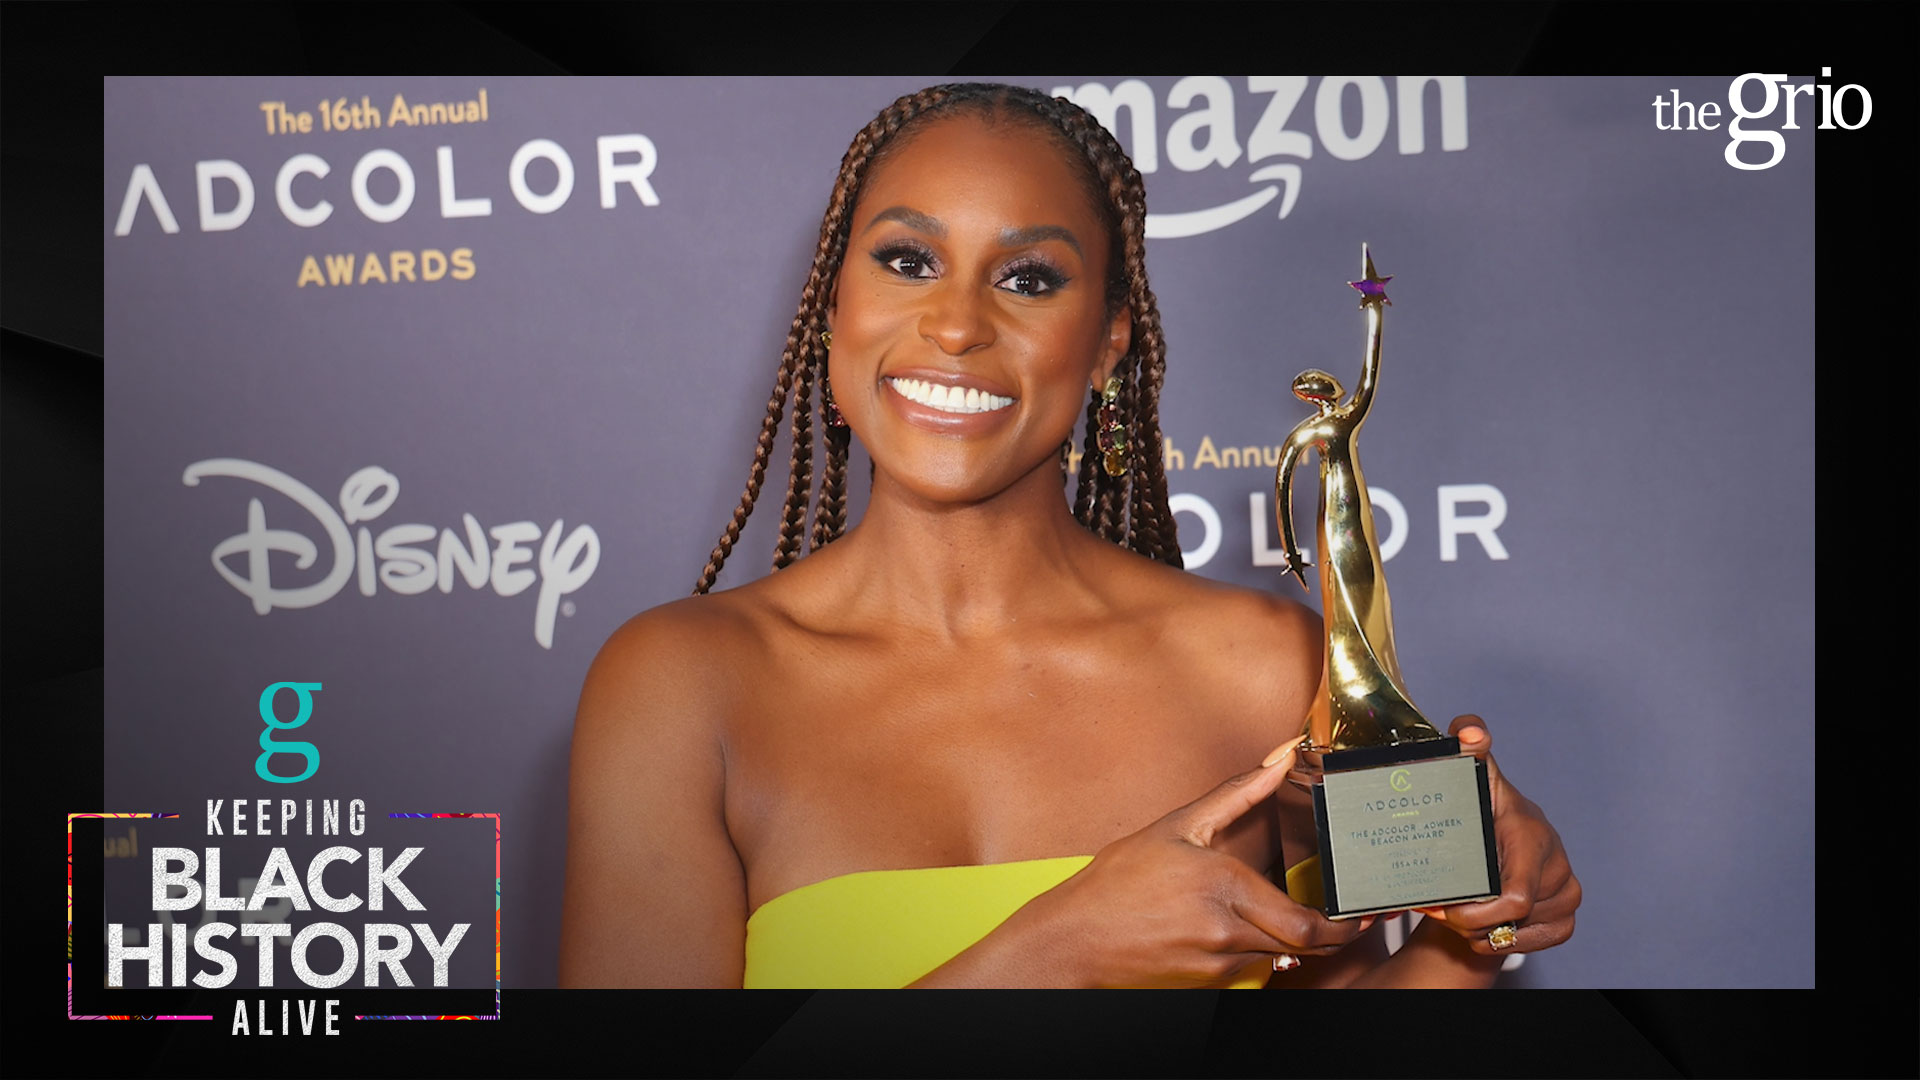 Watch: How Issa Rae paved her own path to Hollywood